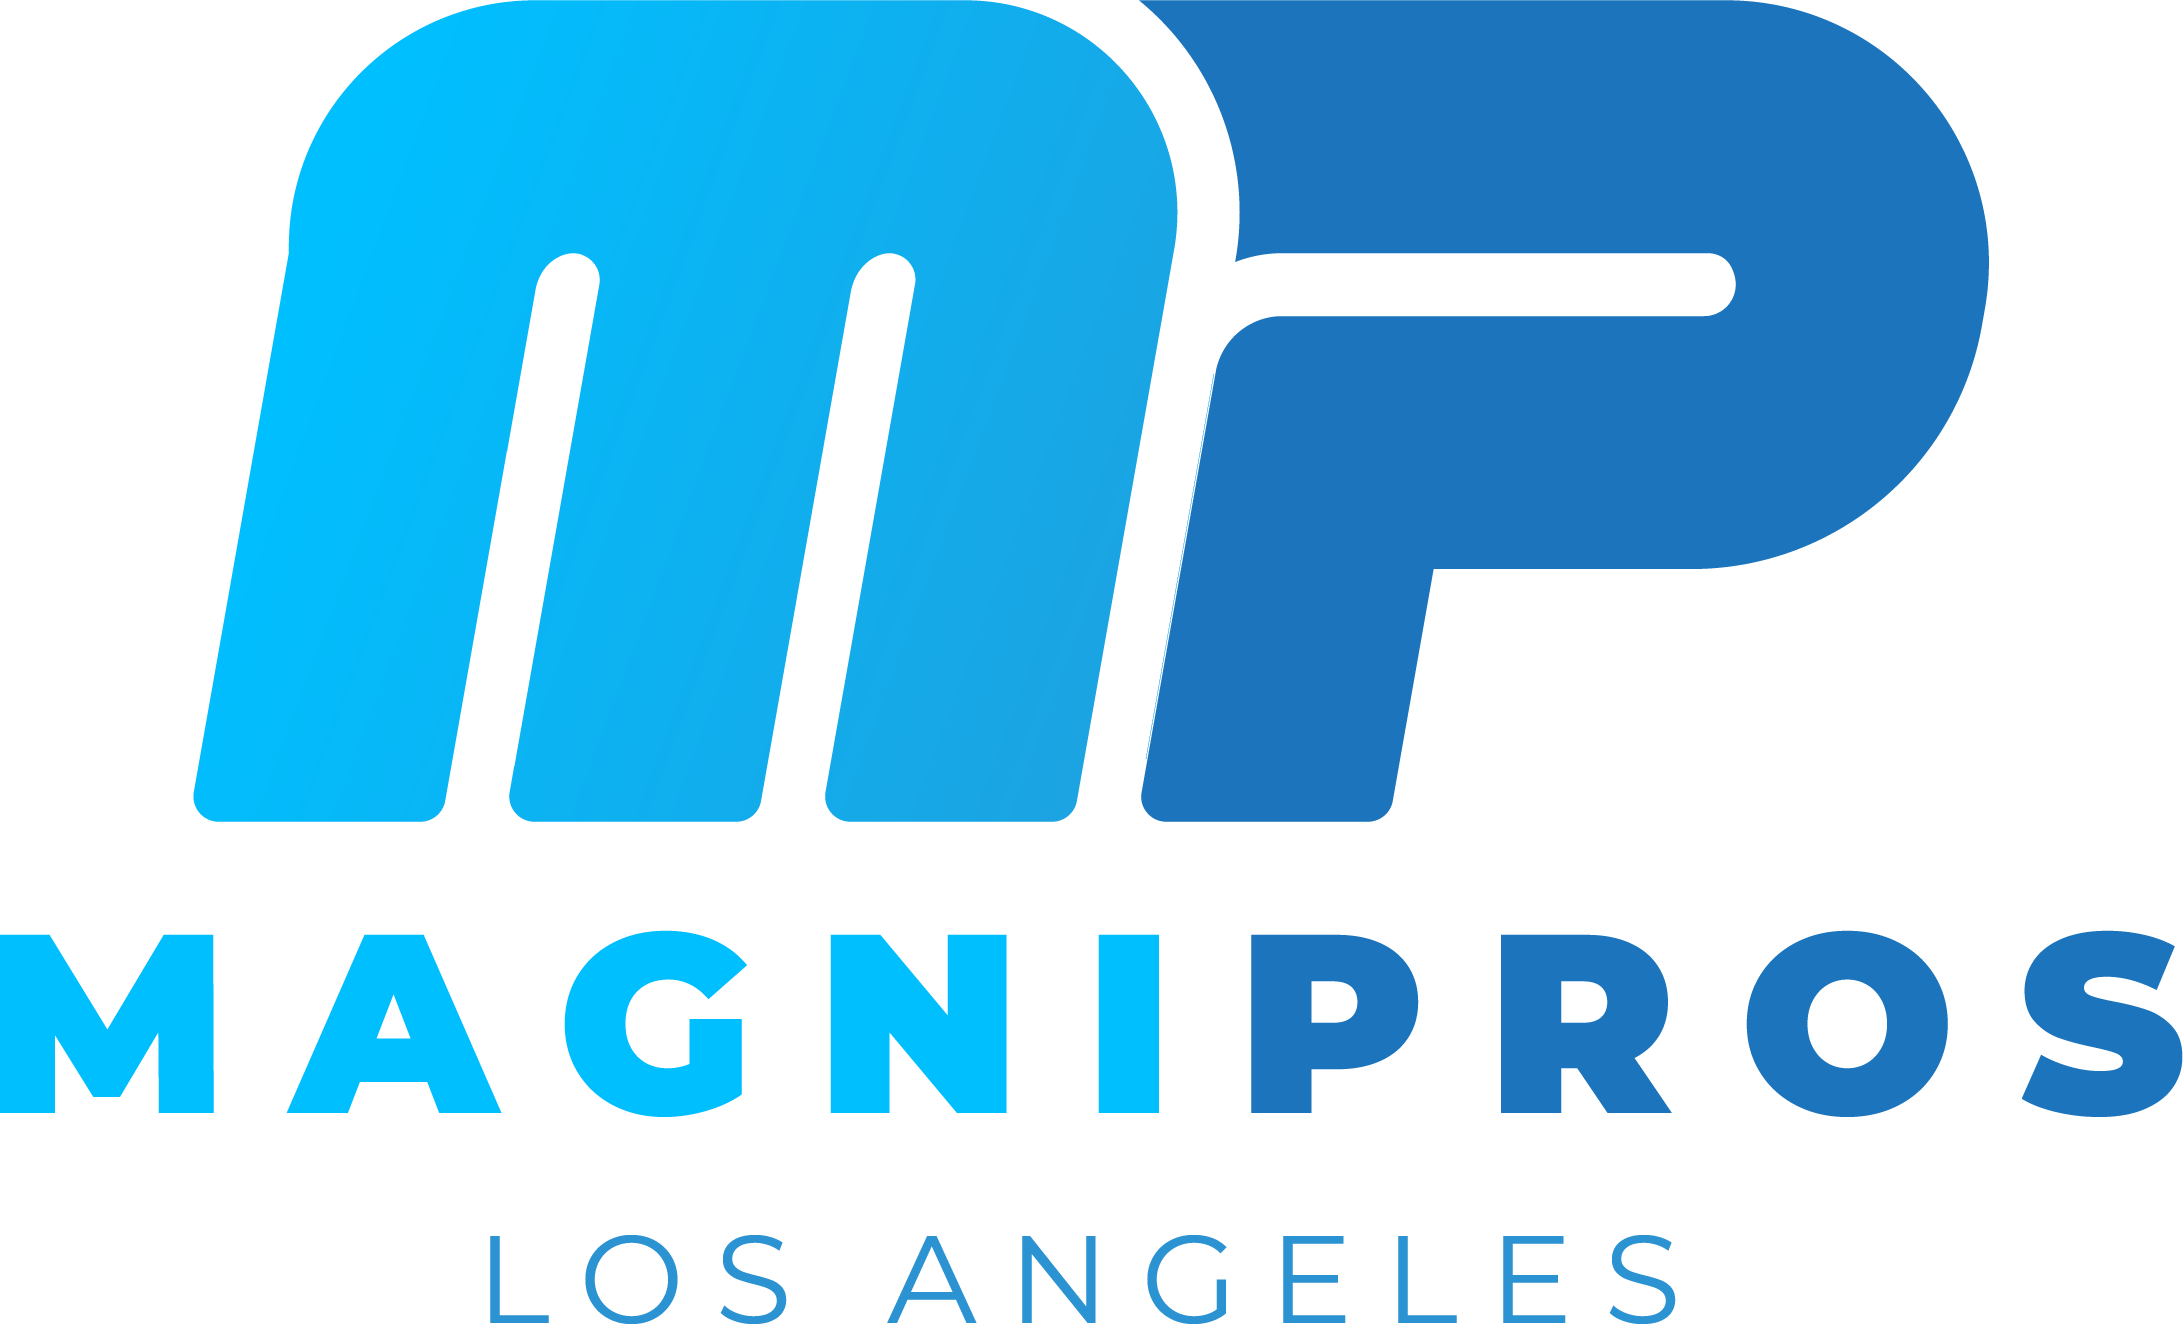 MagniPros